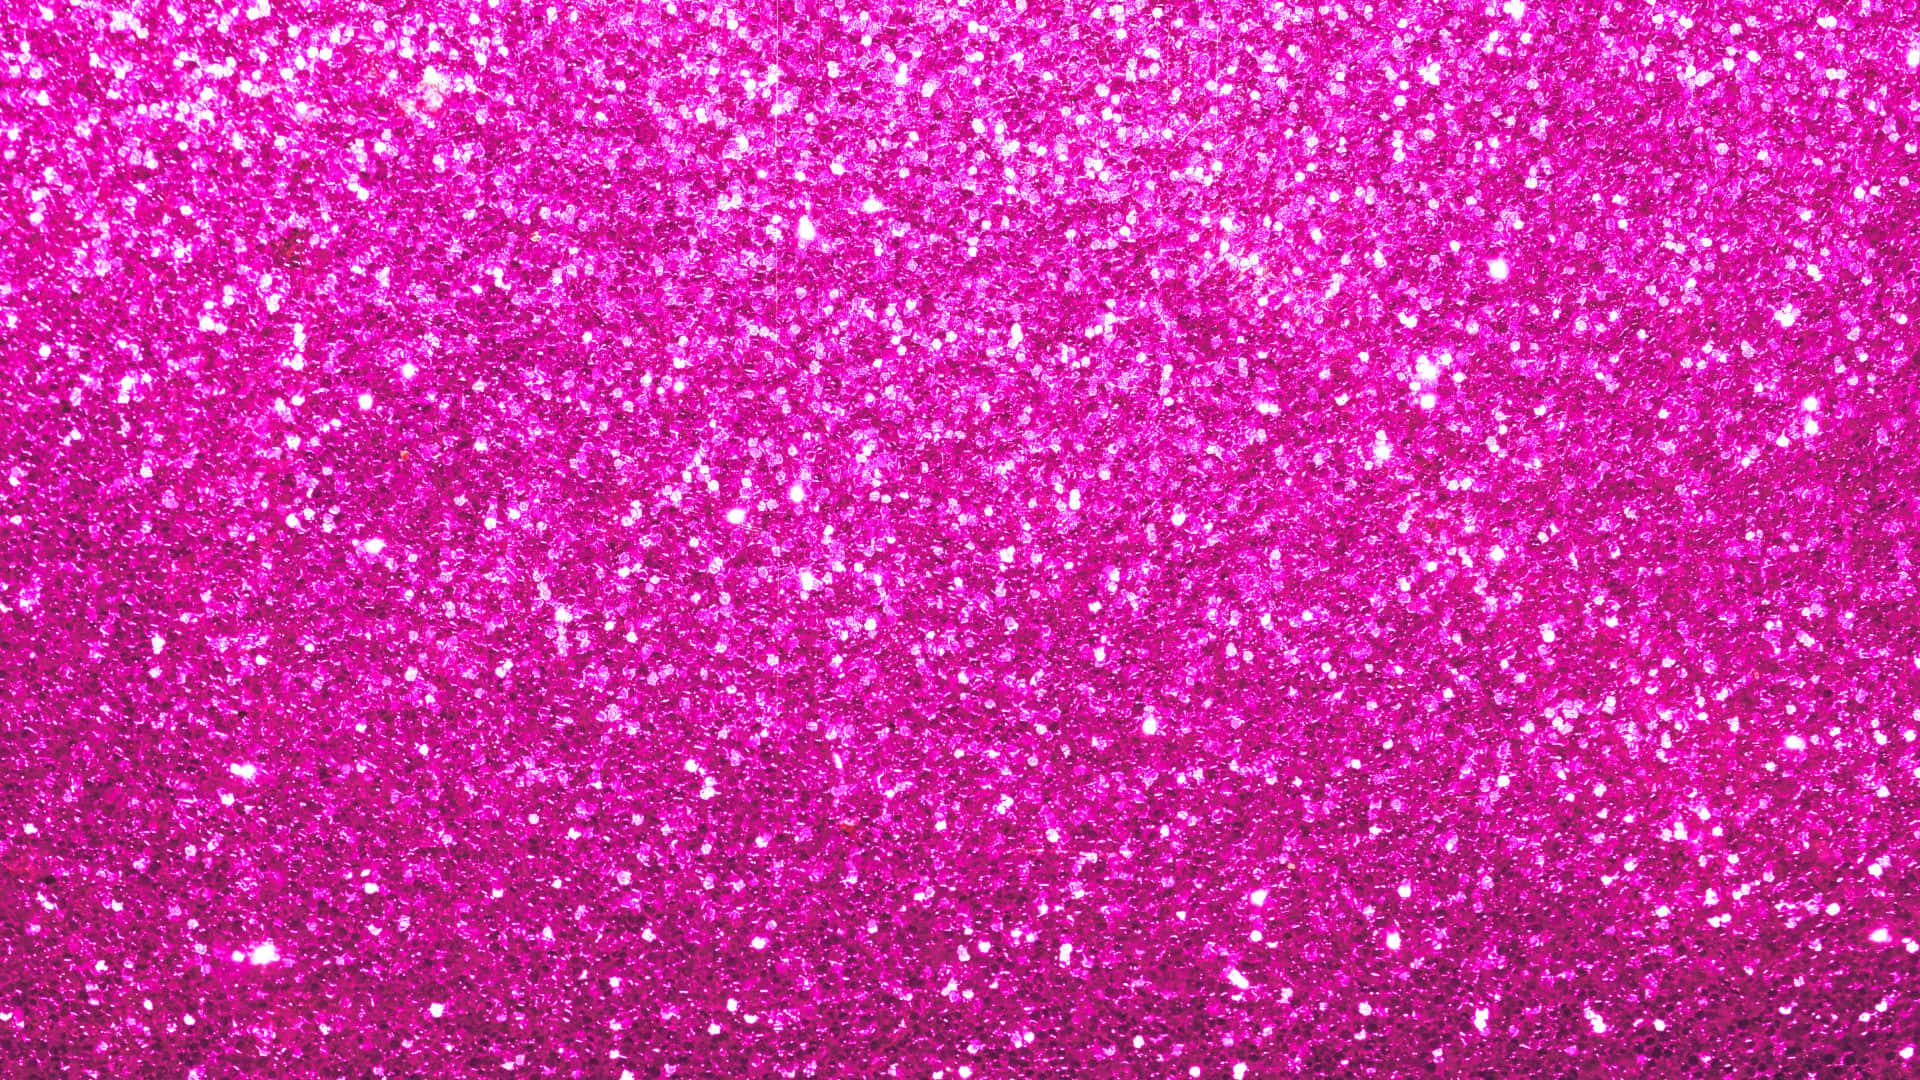 A Mesmerizing Display of Pink Sparkles Wallpaper